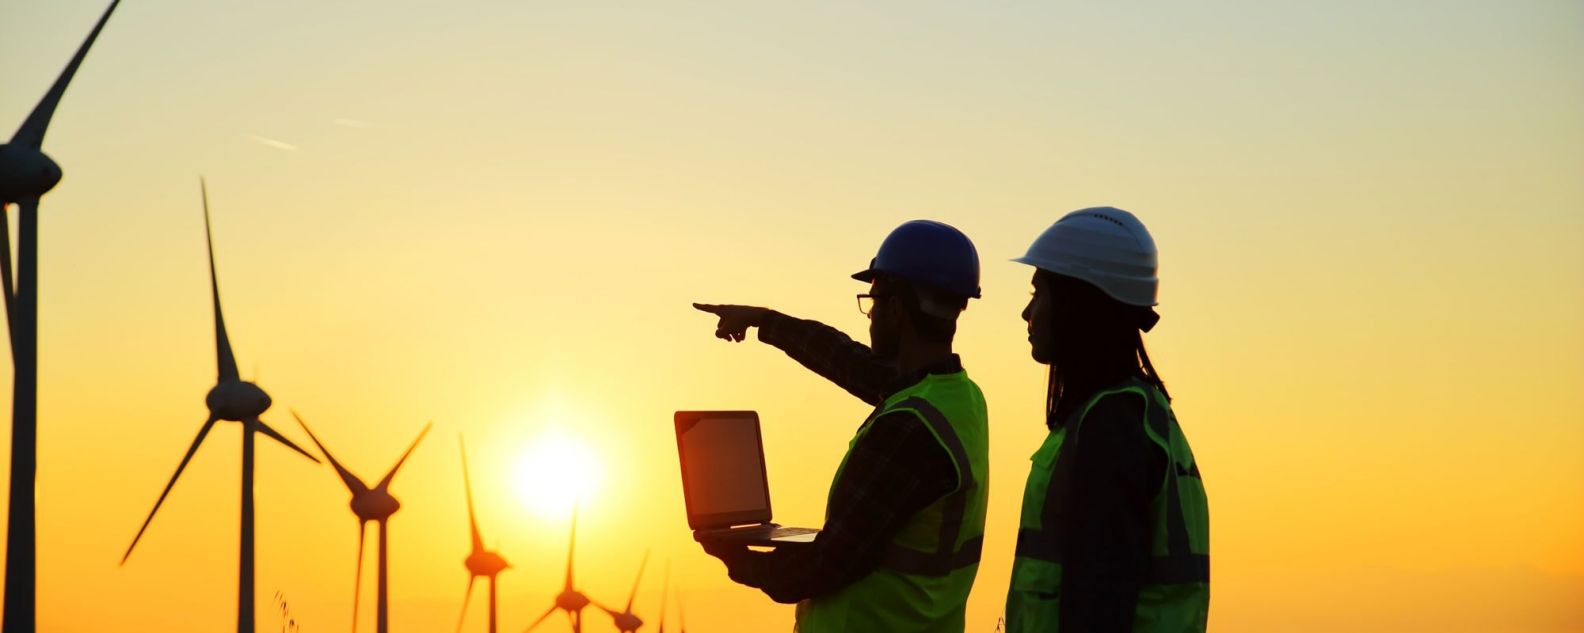 Two workers, one pointing to wind machines with a sunset background